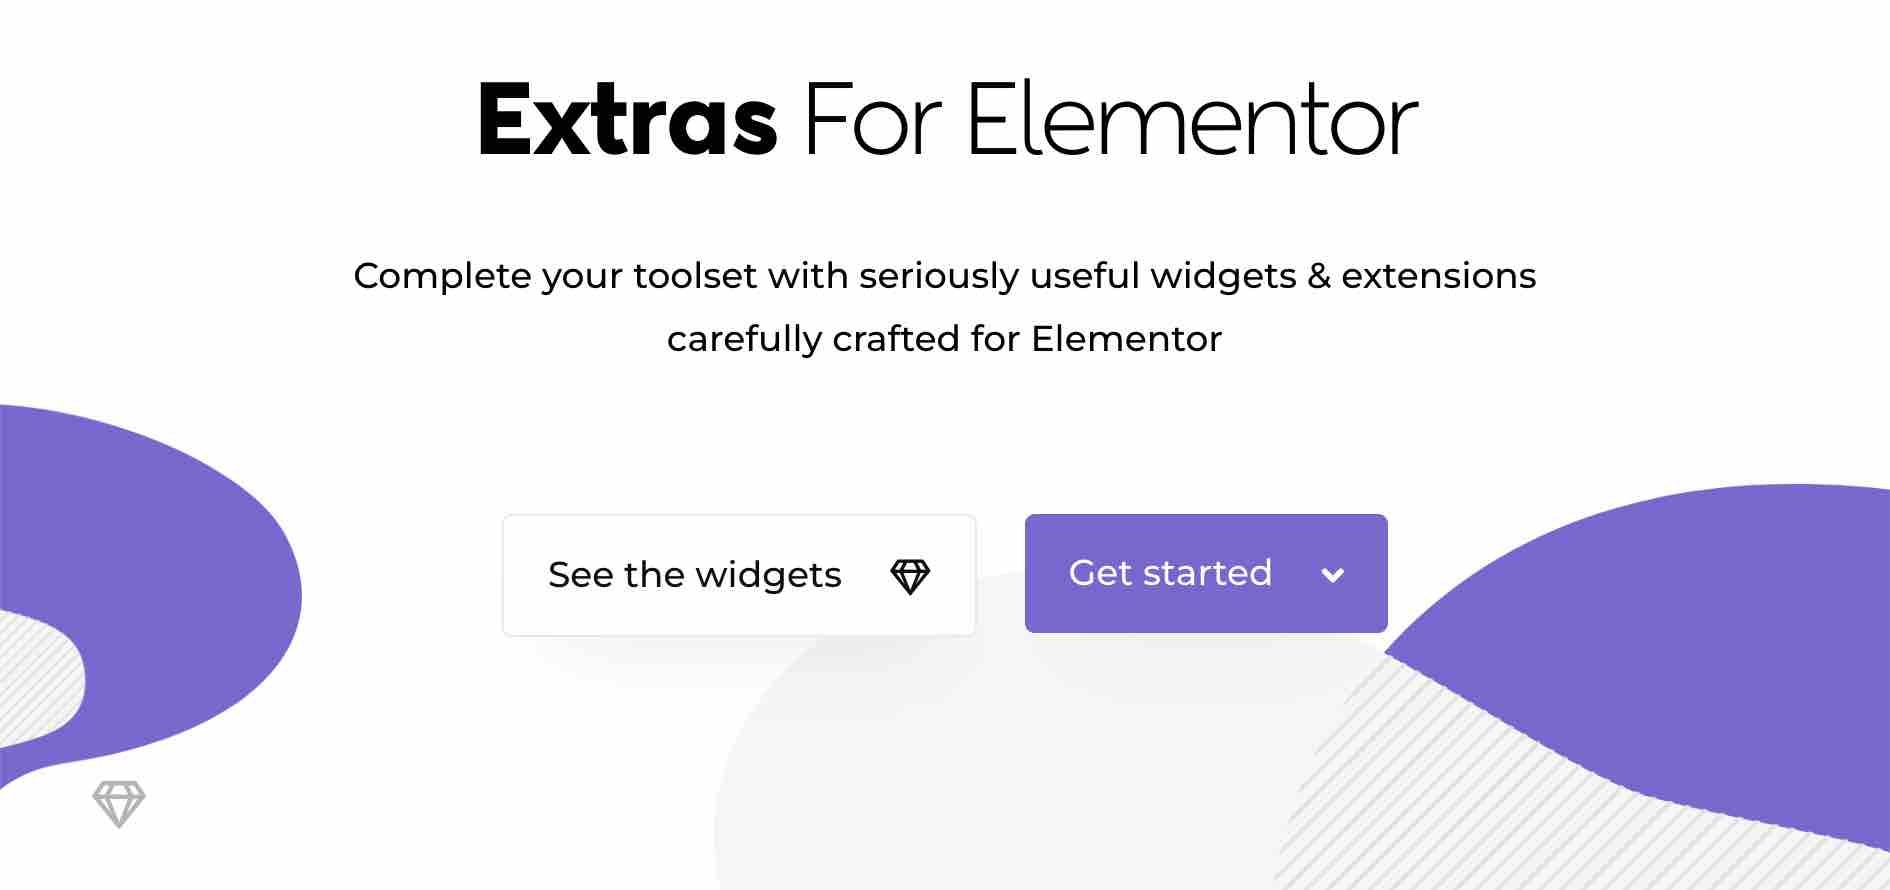 Extras for Elementor is a widget toolkit.